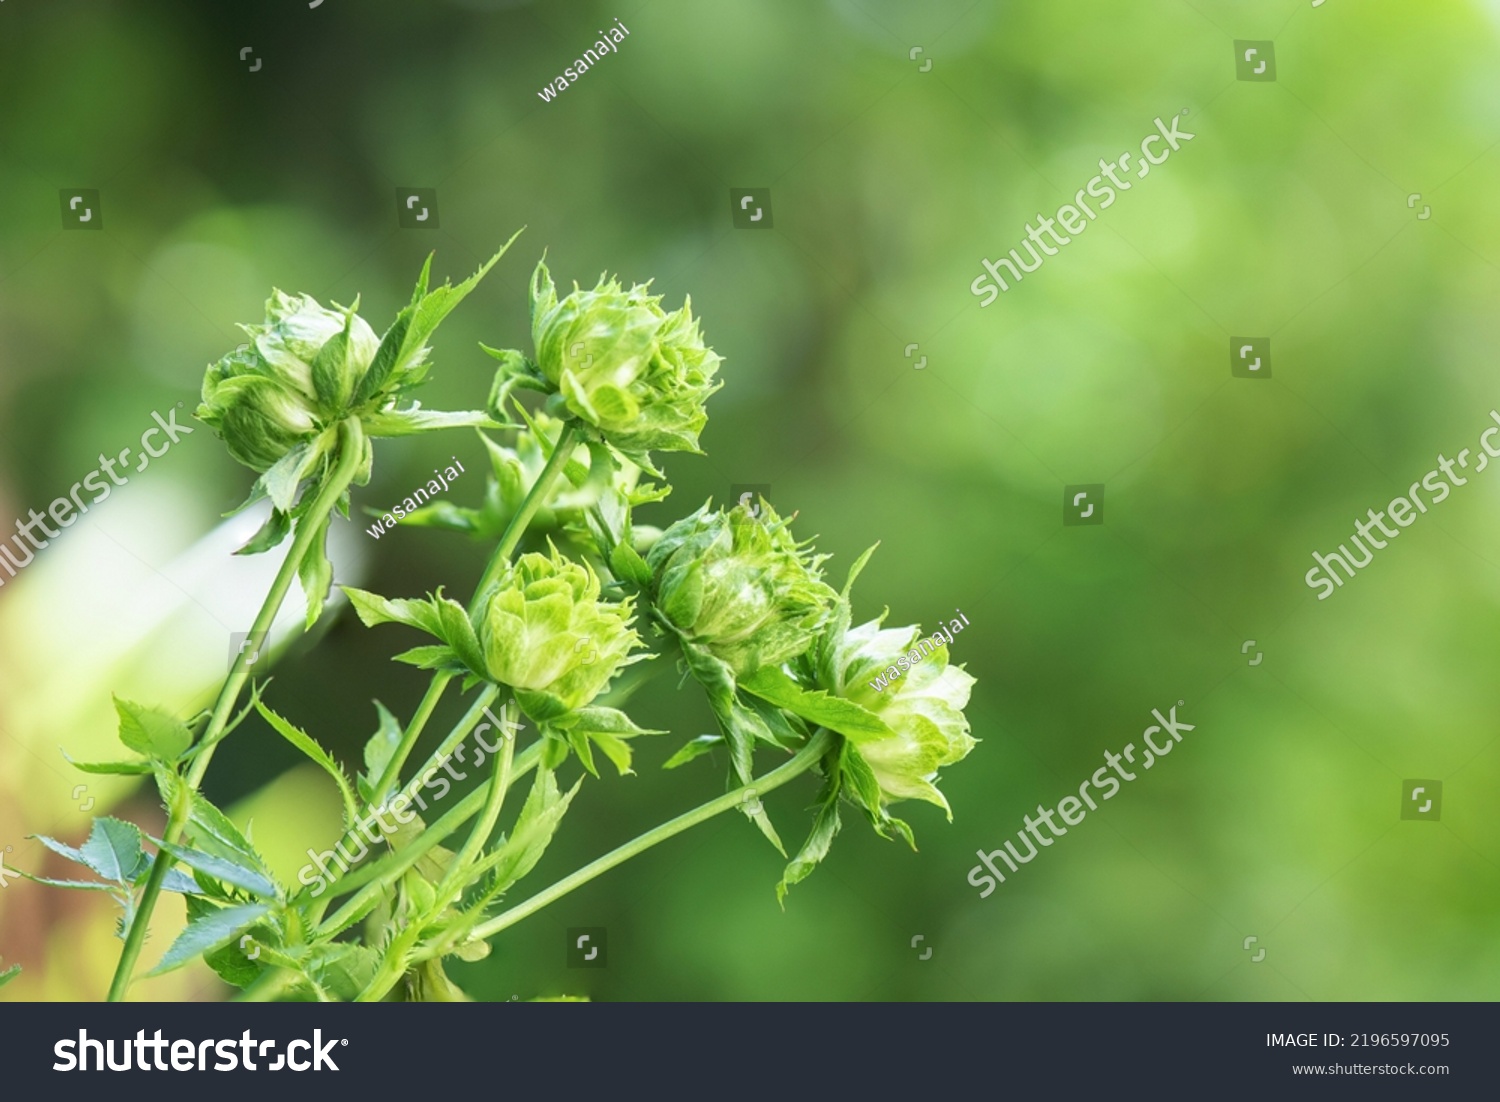 Green rose or concourse rose on bokeh nature background. #2196597095